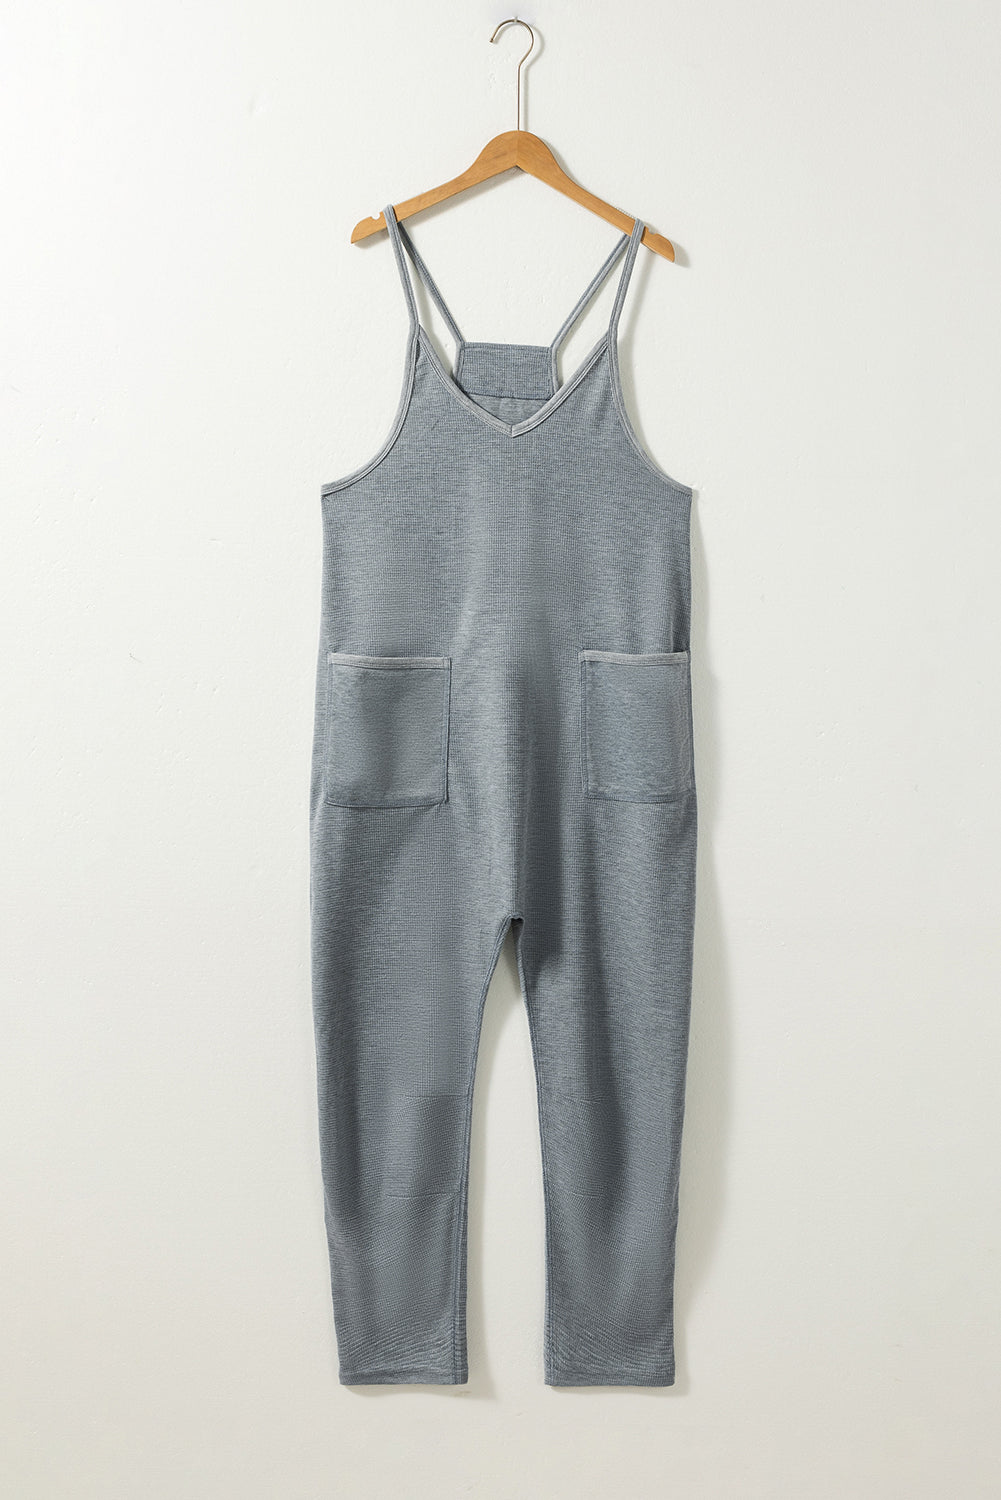 Gray Waffle Knit Spaghetti Straps Loose Fit Jumpsuit Jumpsuits & Rompers JT's Designer Fashion